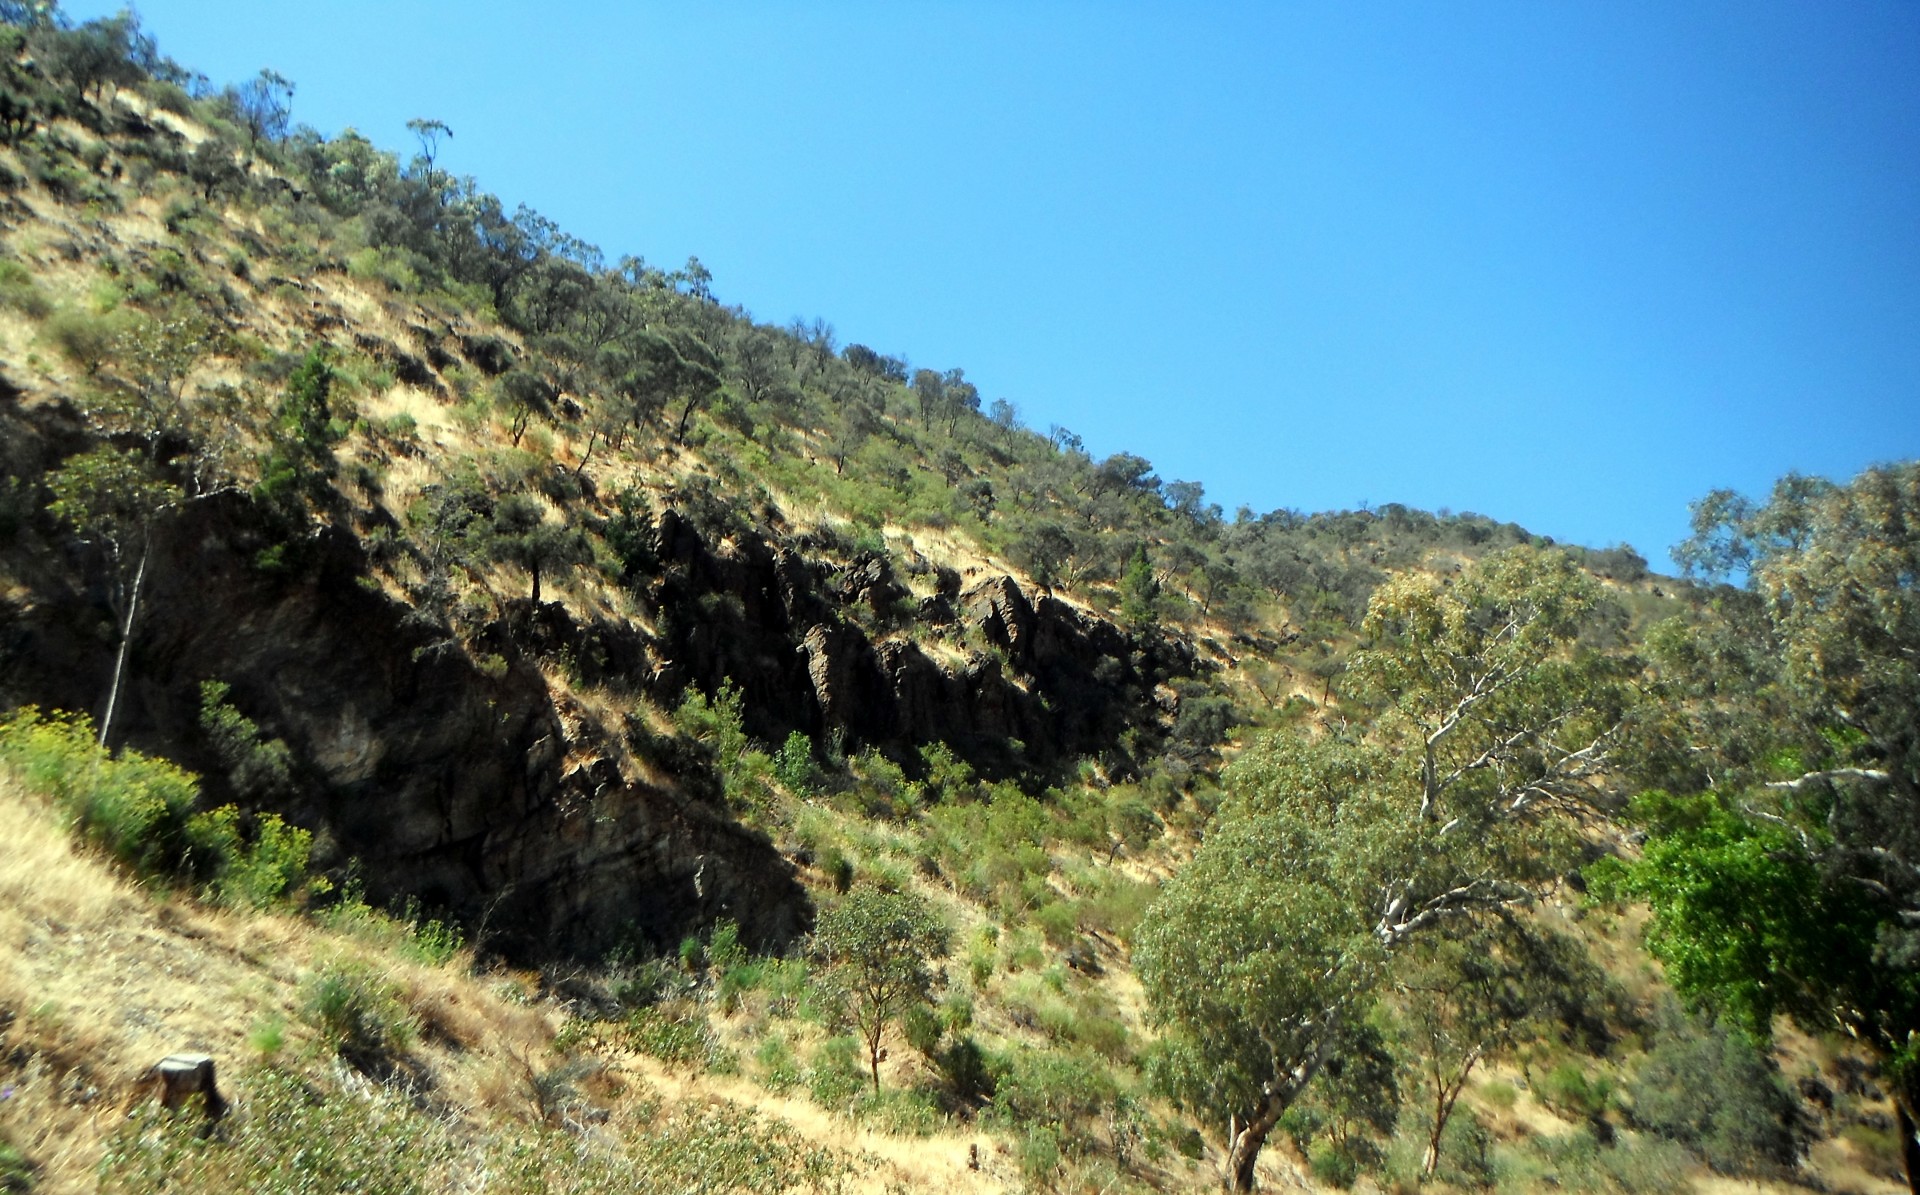 Not far from the suburbs is this amazing scenery of the River Torrens Gorge.